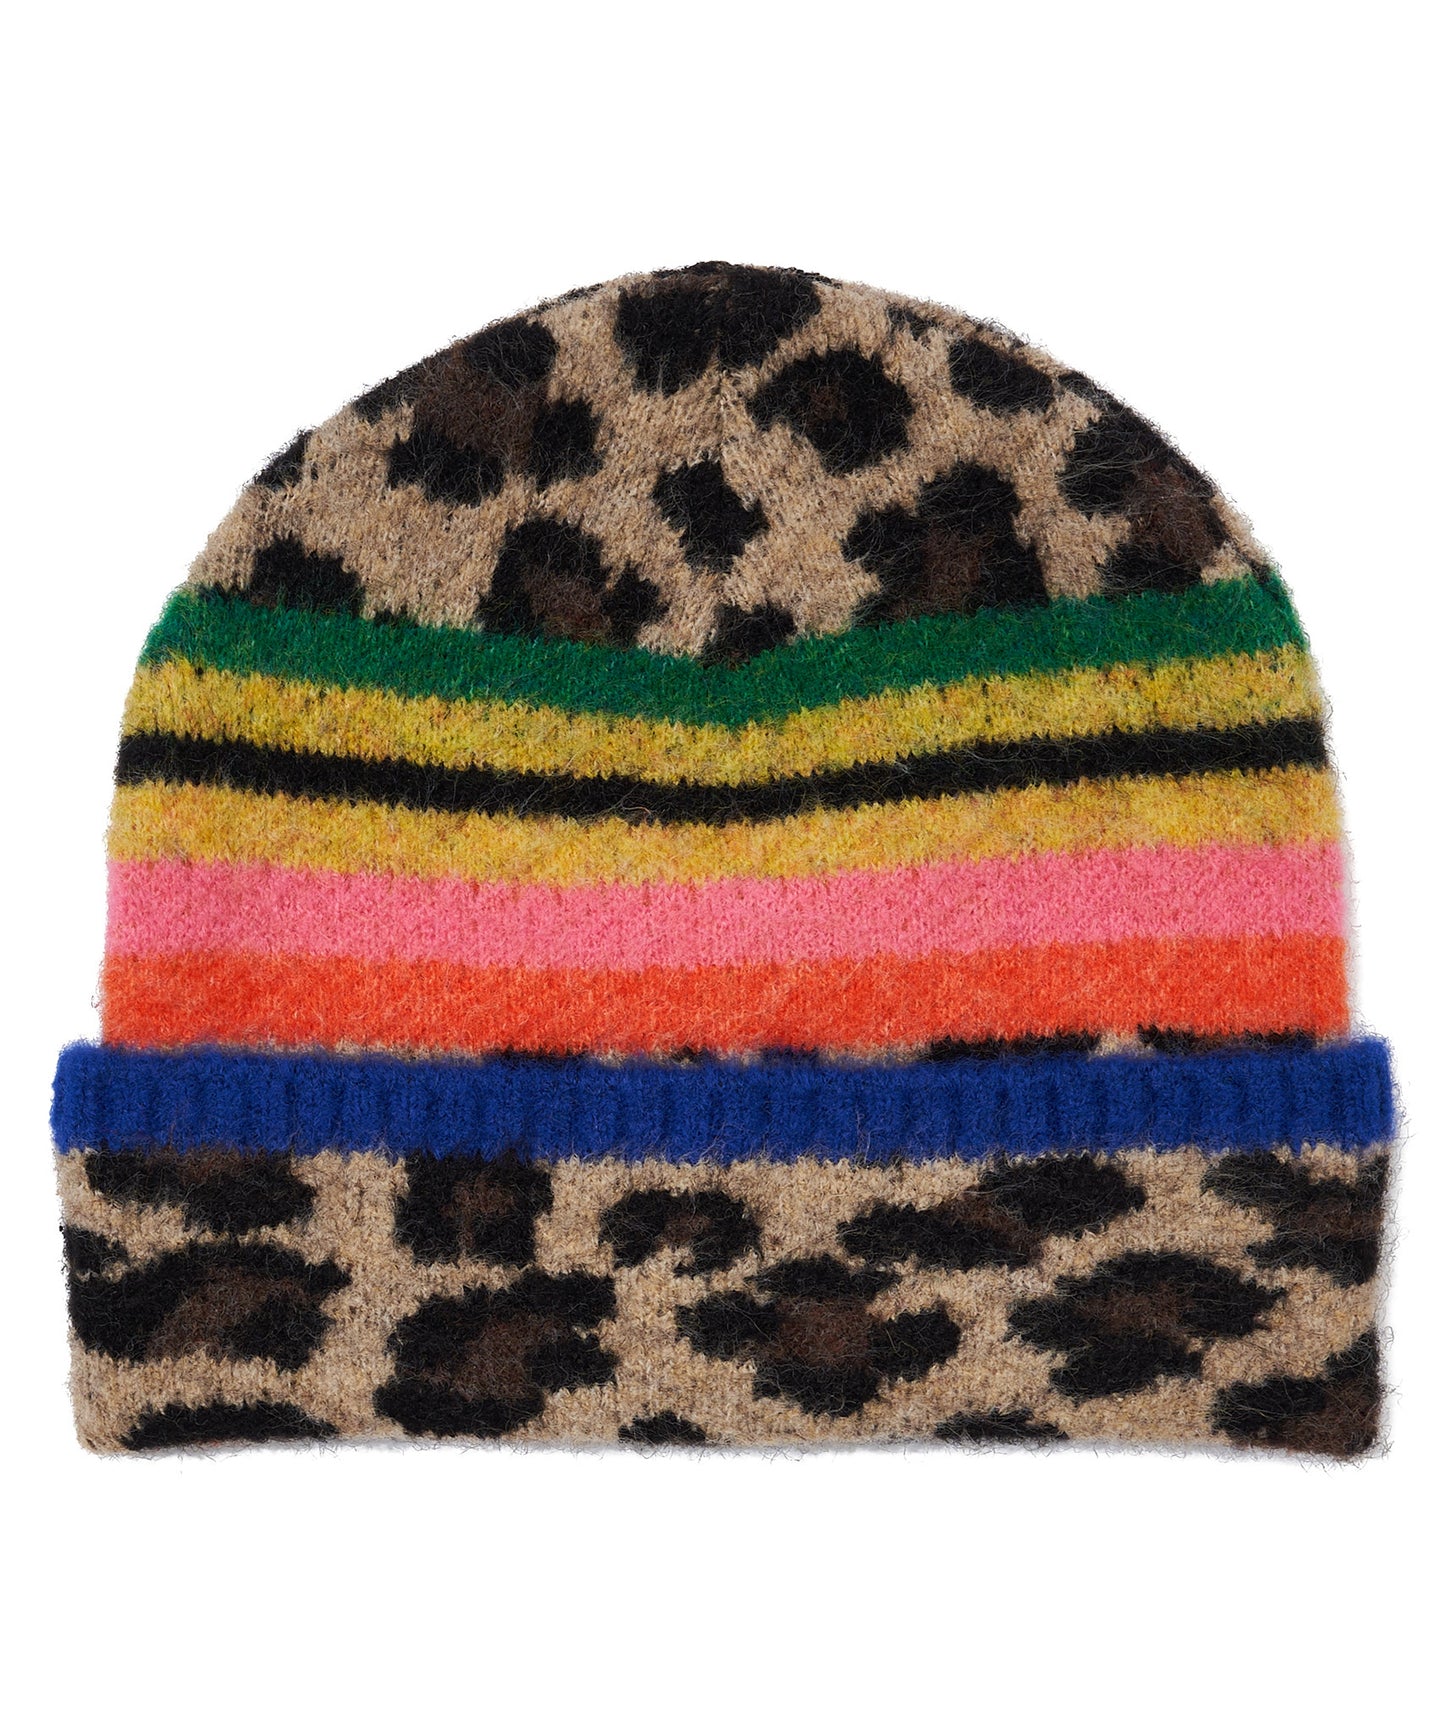 Sport Cat Beanie in color Camel